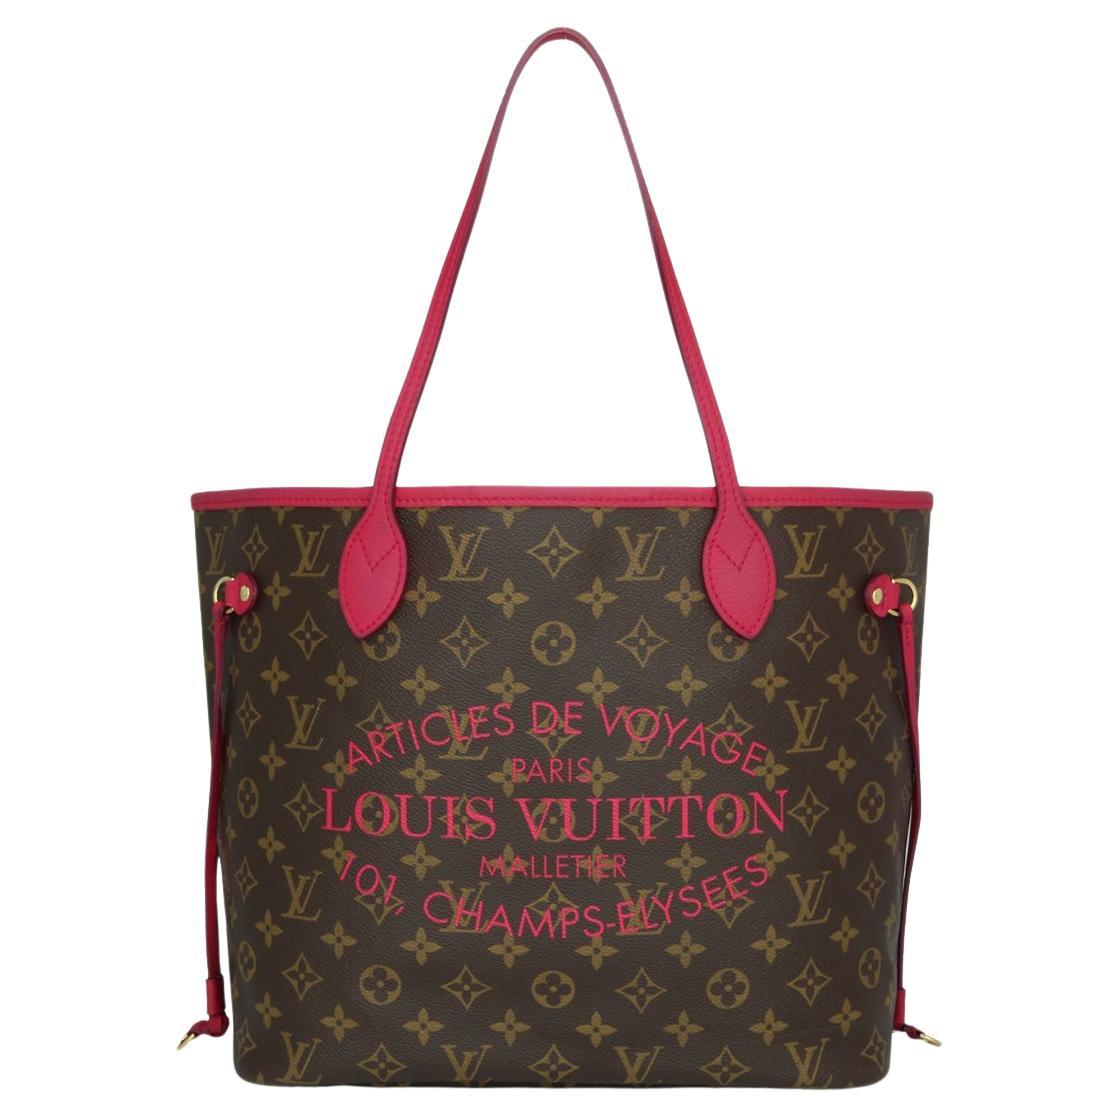 Louis Vuitton Neverfull MM Ikat Bag in Monogram Fuchsia 2013 Limited Edition